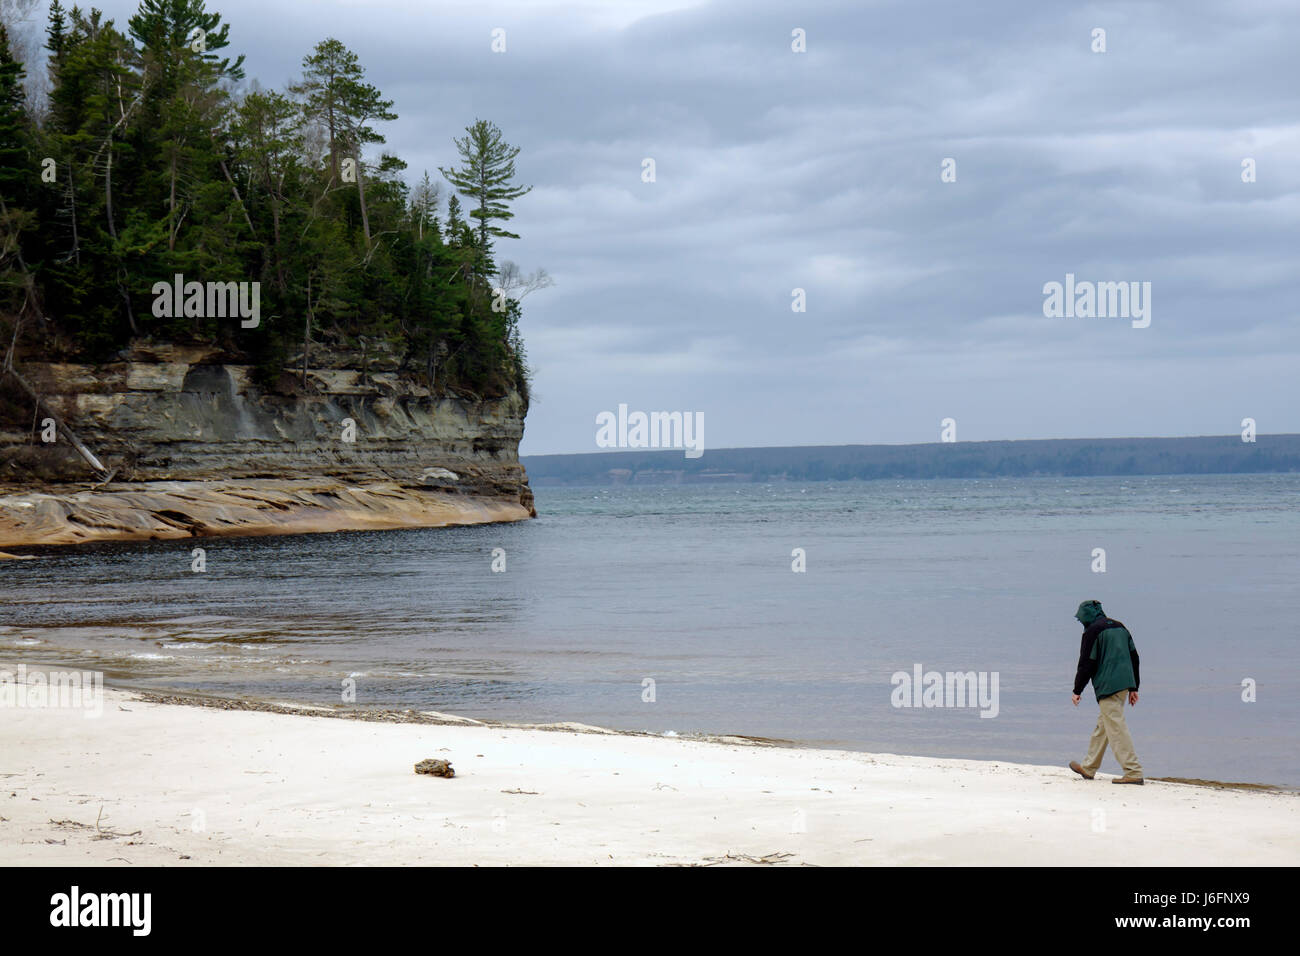 Michigan Upper Peninsula,U.P.,UP,Lake Superior,Pictured Rocks National Lakeshore,Miners Beach,Great Lakes,early spring,sandstone cliff,sand,public,bea Stock Photo